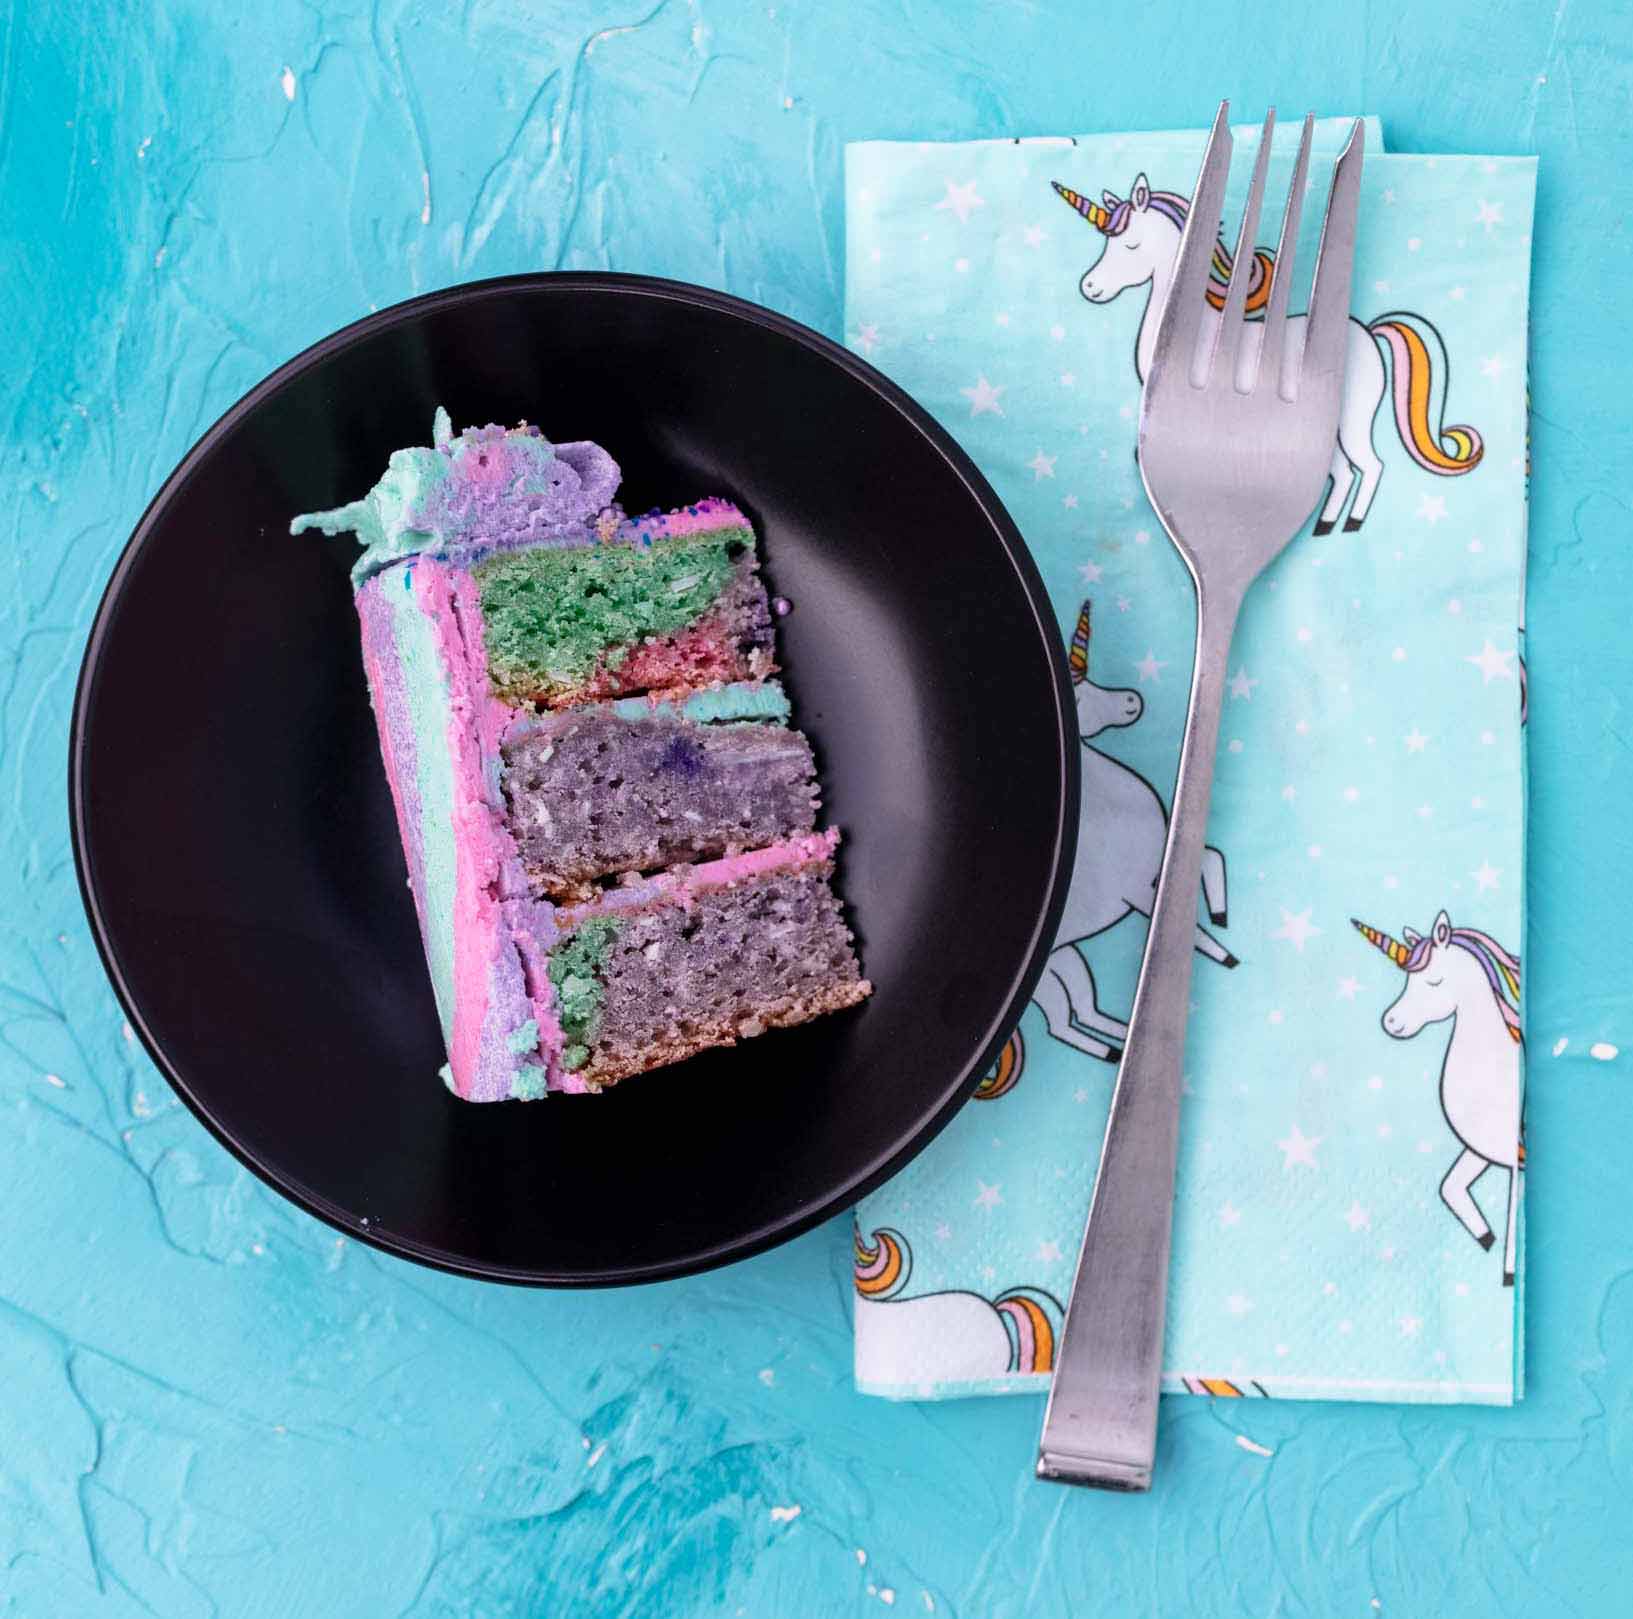 slice of coconut cake from a mini vegan pastel rainbow colored cake